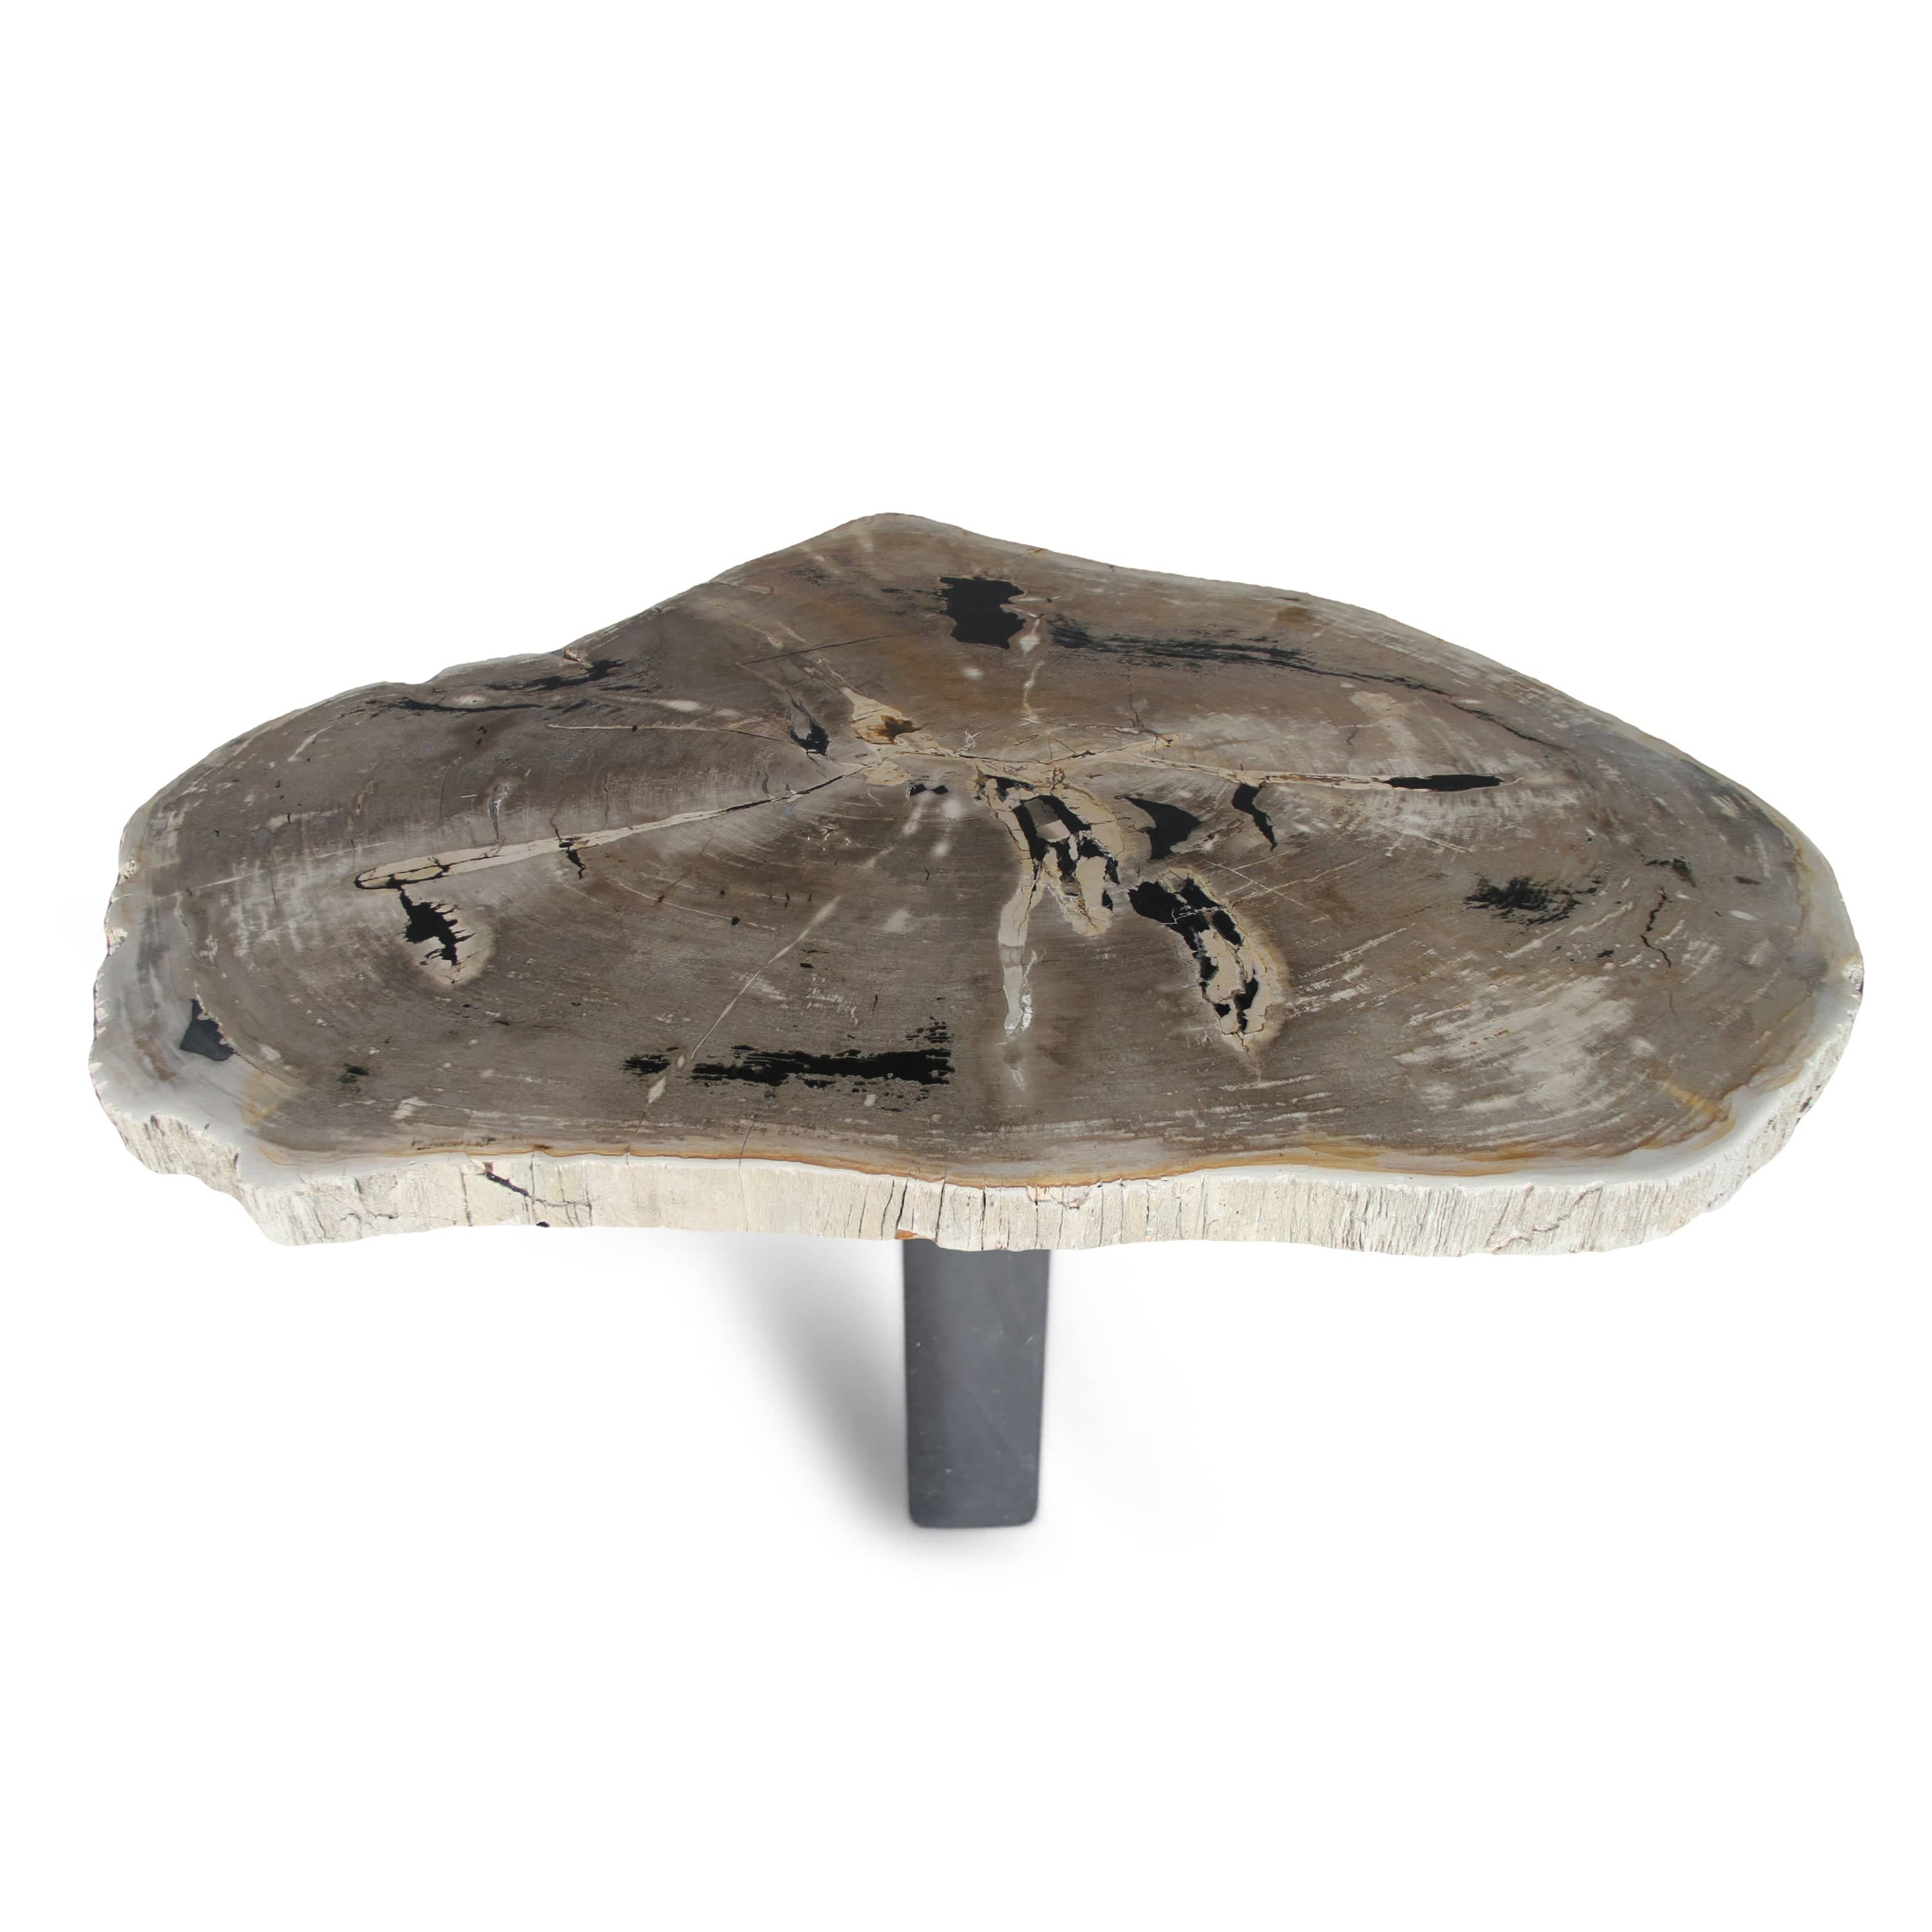 Kalifano Petrified Wood Petrified Wood Round Slab Coffee Table from Indonesia - 61" / 429 lbs PWT15600.002